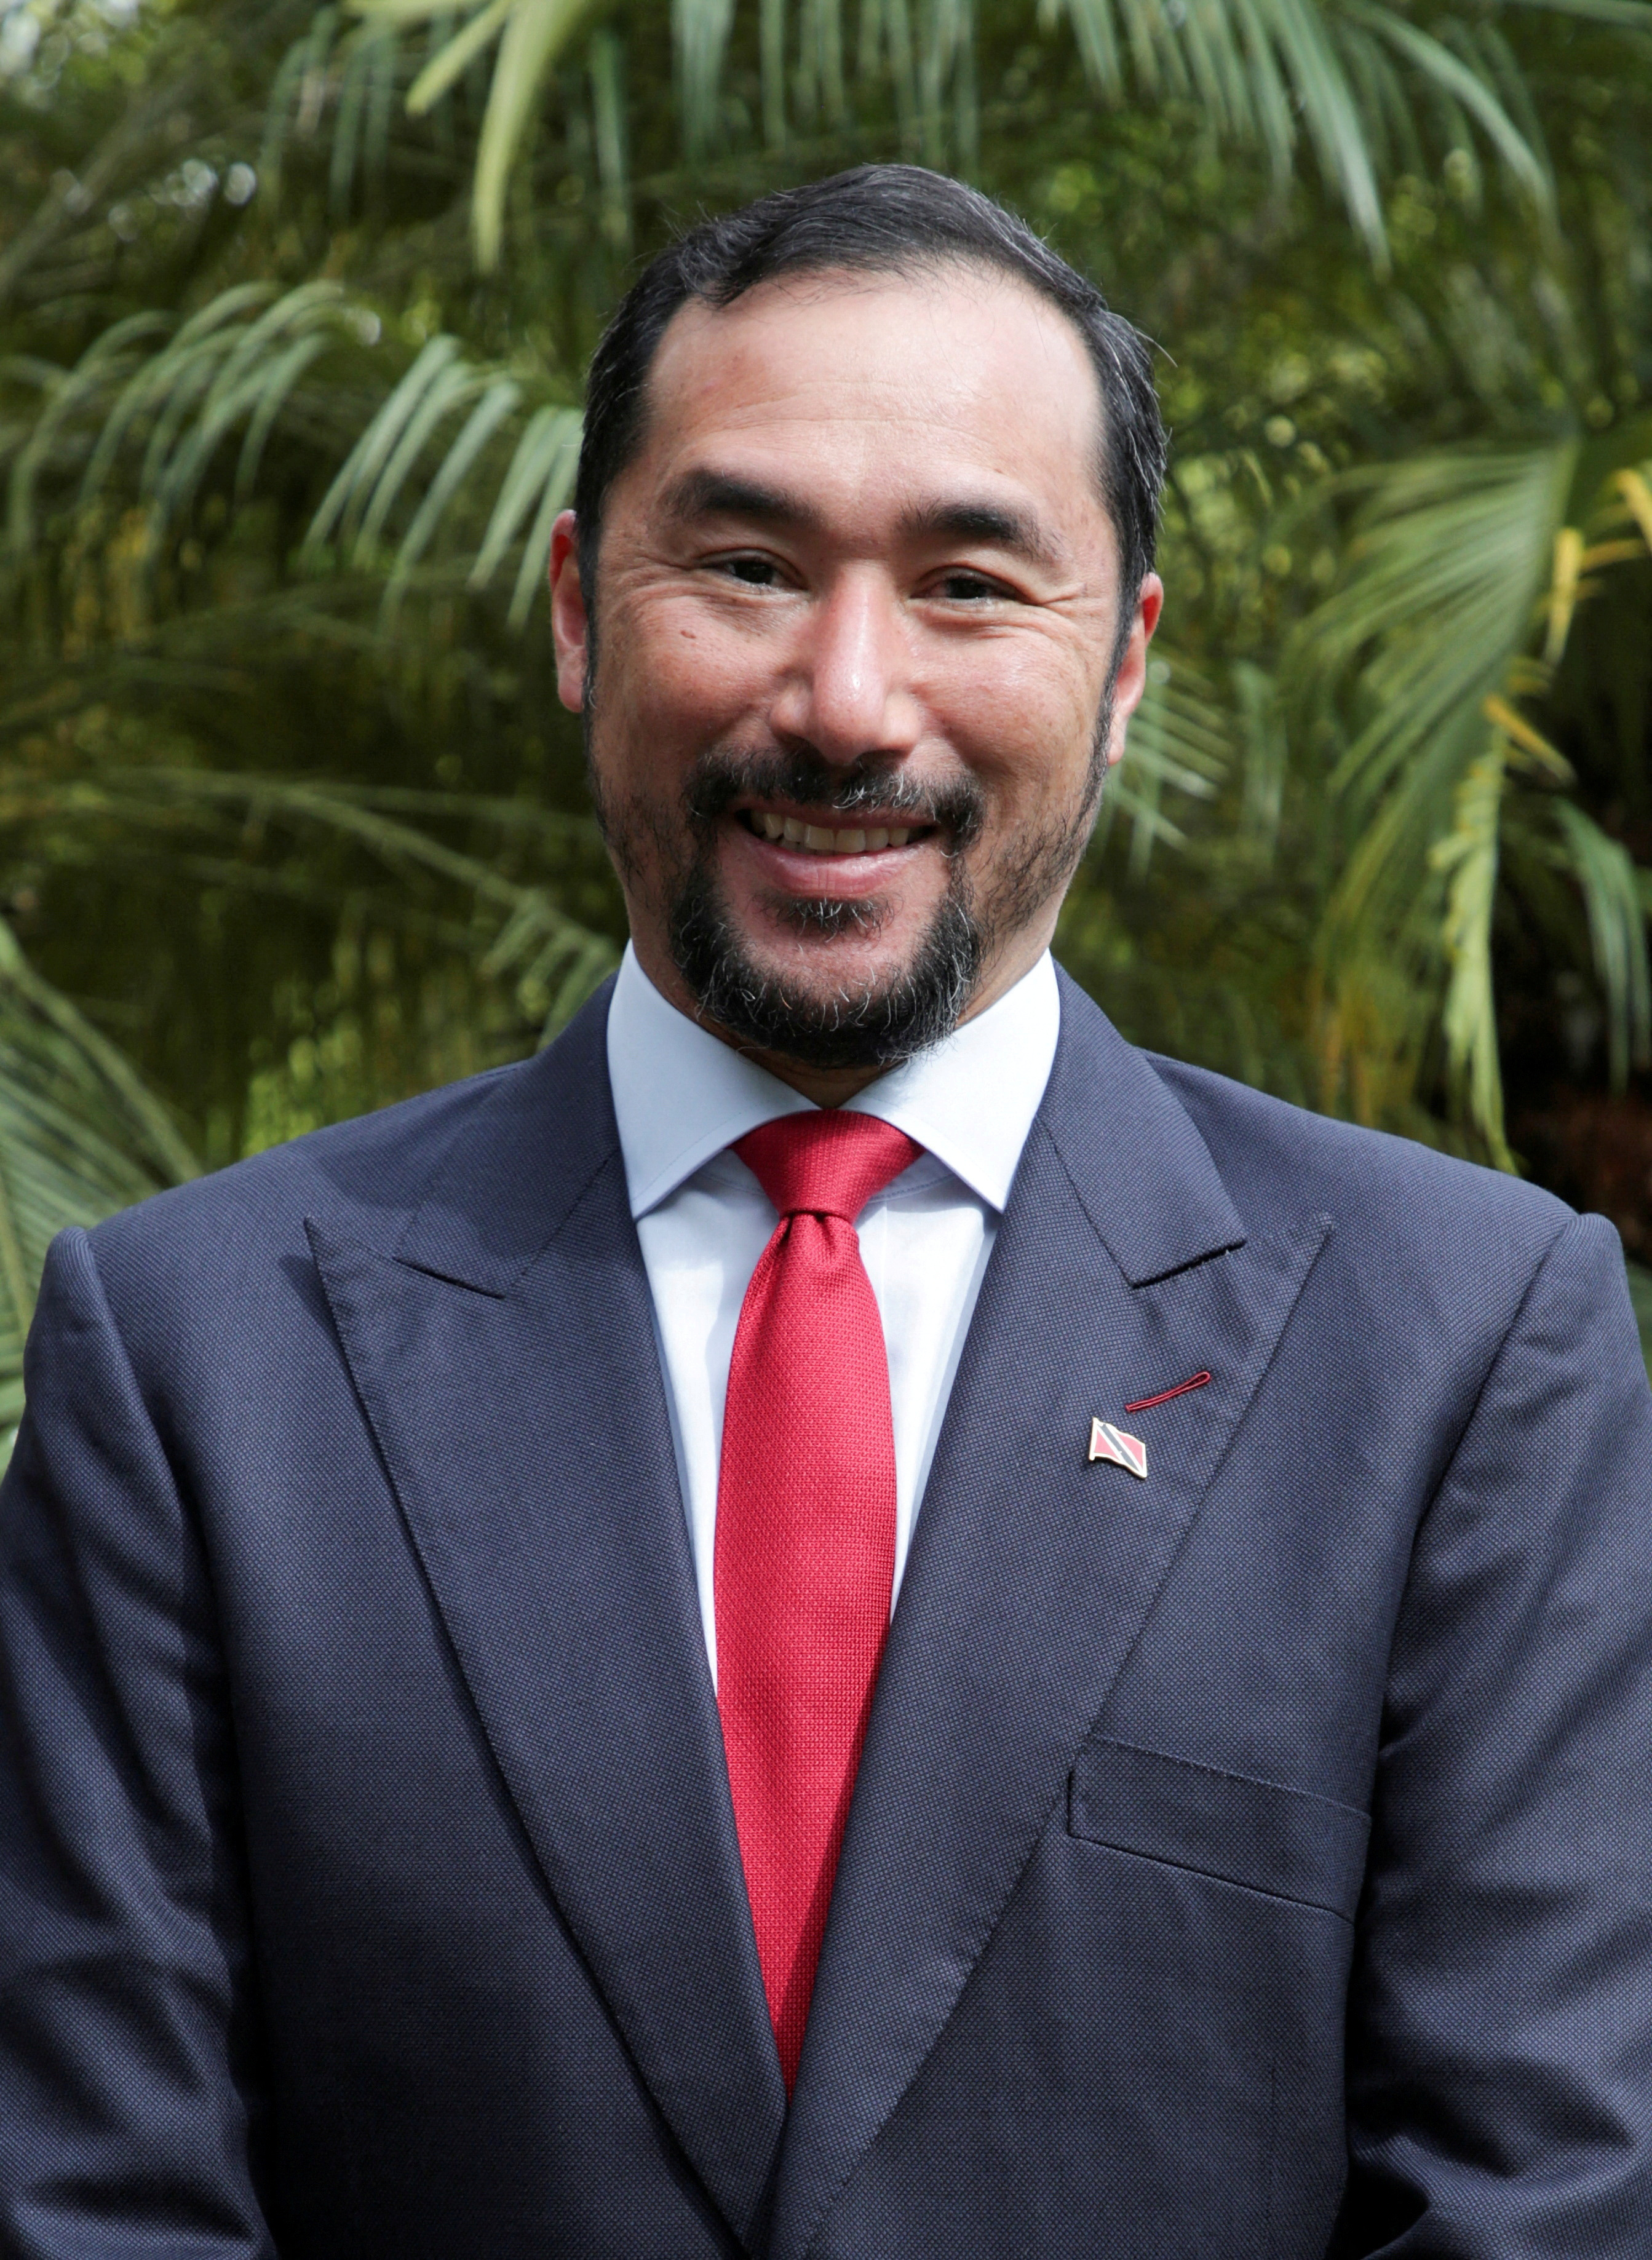 Trinidad and Tobago's Energy Minister Stuart Young poses for a photograph, in Paramaribo